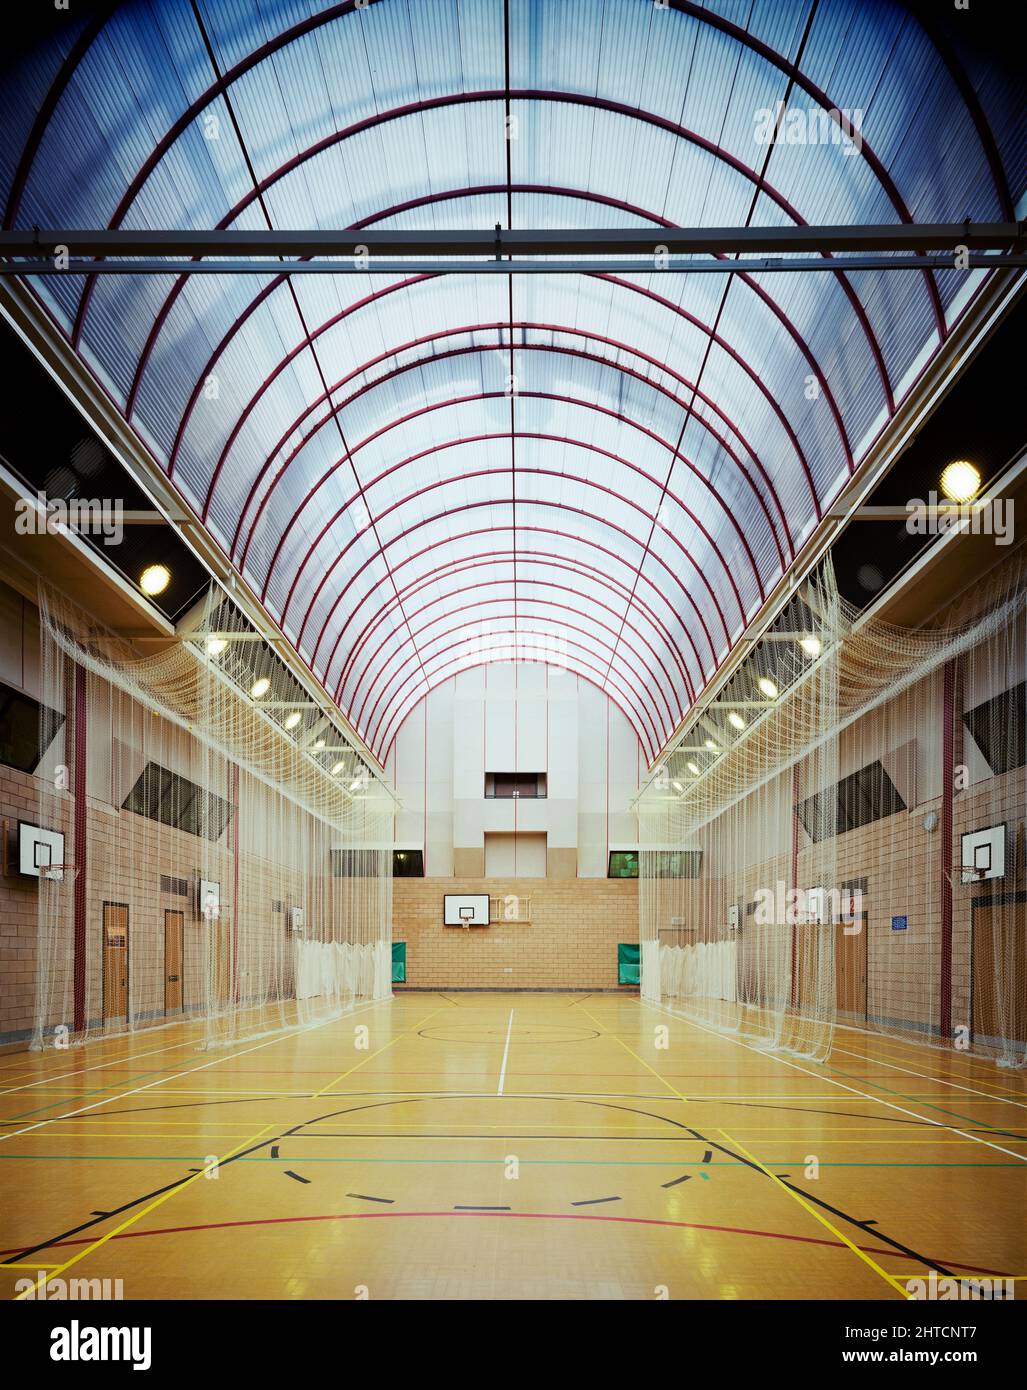 Perronet Thompson School, Wawne Road, Bransholme, Kingston upon Hull, 17/04/1989. The interior of the sports hall at Perronet Thompson School with nets set up for cricket practice, showing the glazed barrel vaulted ceiling. Laing's Yorkshire Region division began work on site in September 1986 and the building was completed in June 1988.  Bransholme was one of the largest local authority housing estates in Britain at the time and the school was equipped with enhanced facilities for the use of the whole community.  These included the larger lending library, the 'Bransholme Theatre', meetings ro Stock Photo